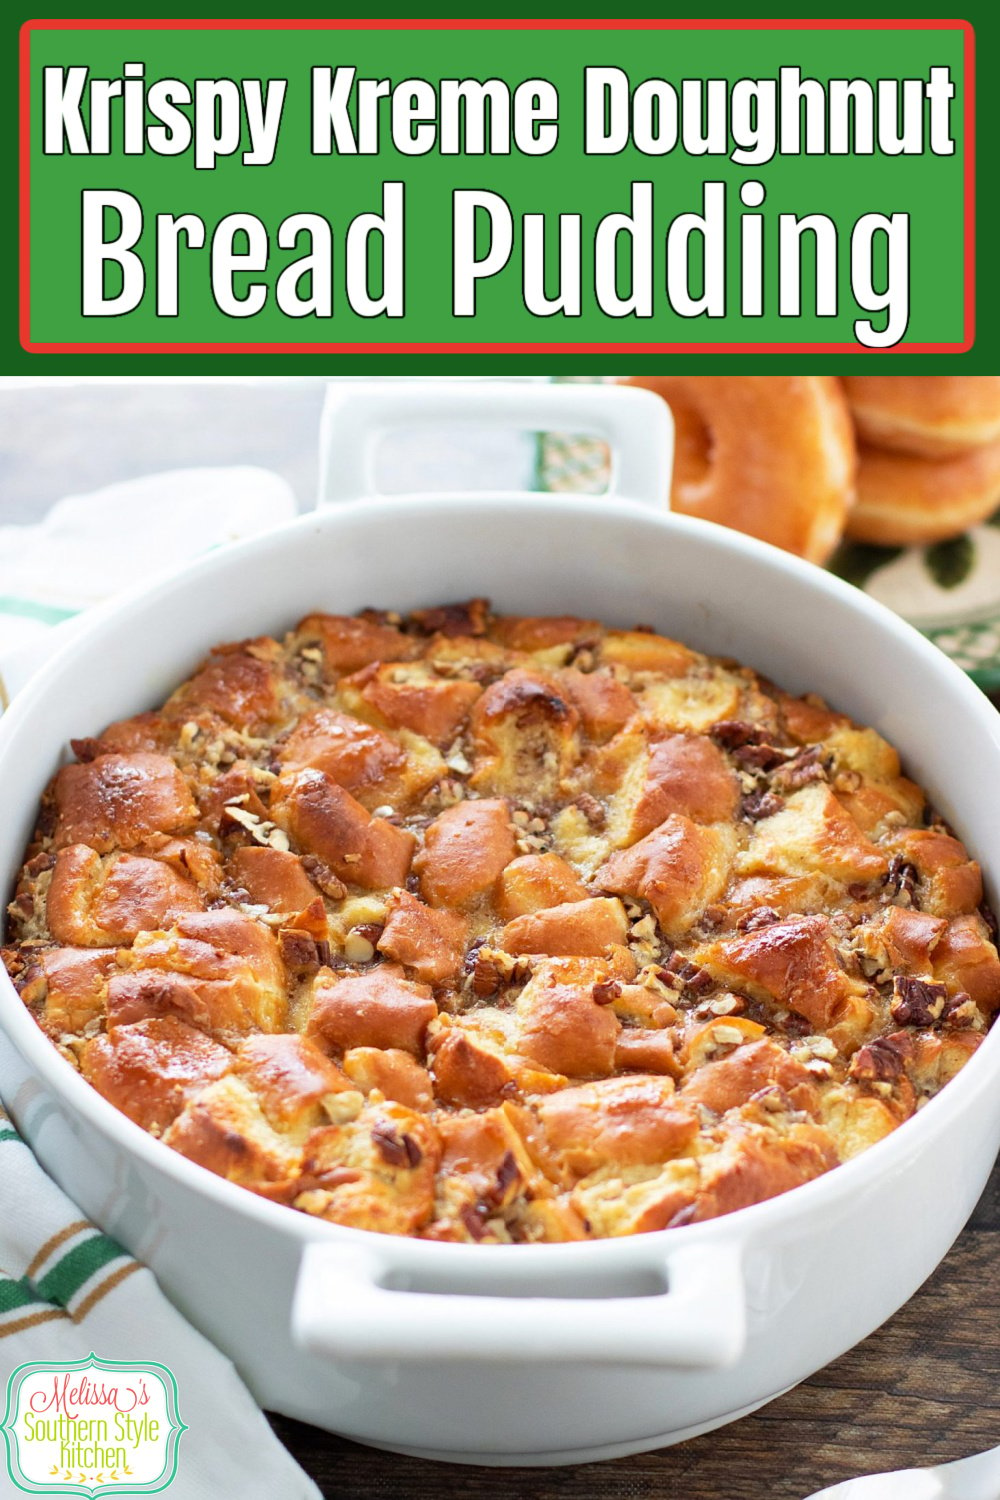 Serve this Krispy Kreme Doughnut Bread Pudding warm topped with ice cream and buttered rum sauce for the finish #krispykremedoughnuts #doughnuts #donuts #krispykreme #doughnutrecipes #doughnutbreadpudding #breadpudding #breadrecipes #doughnutdessertrecipes via @melissasssk